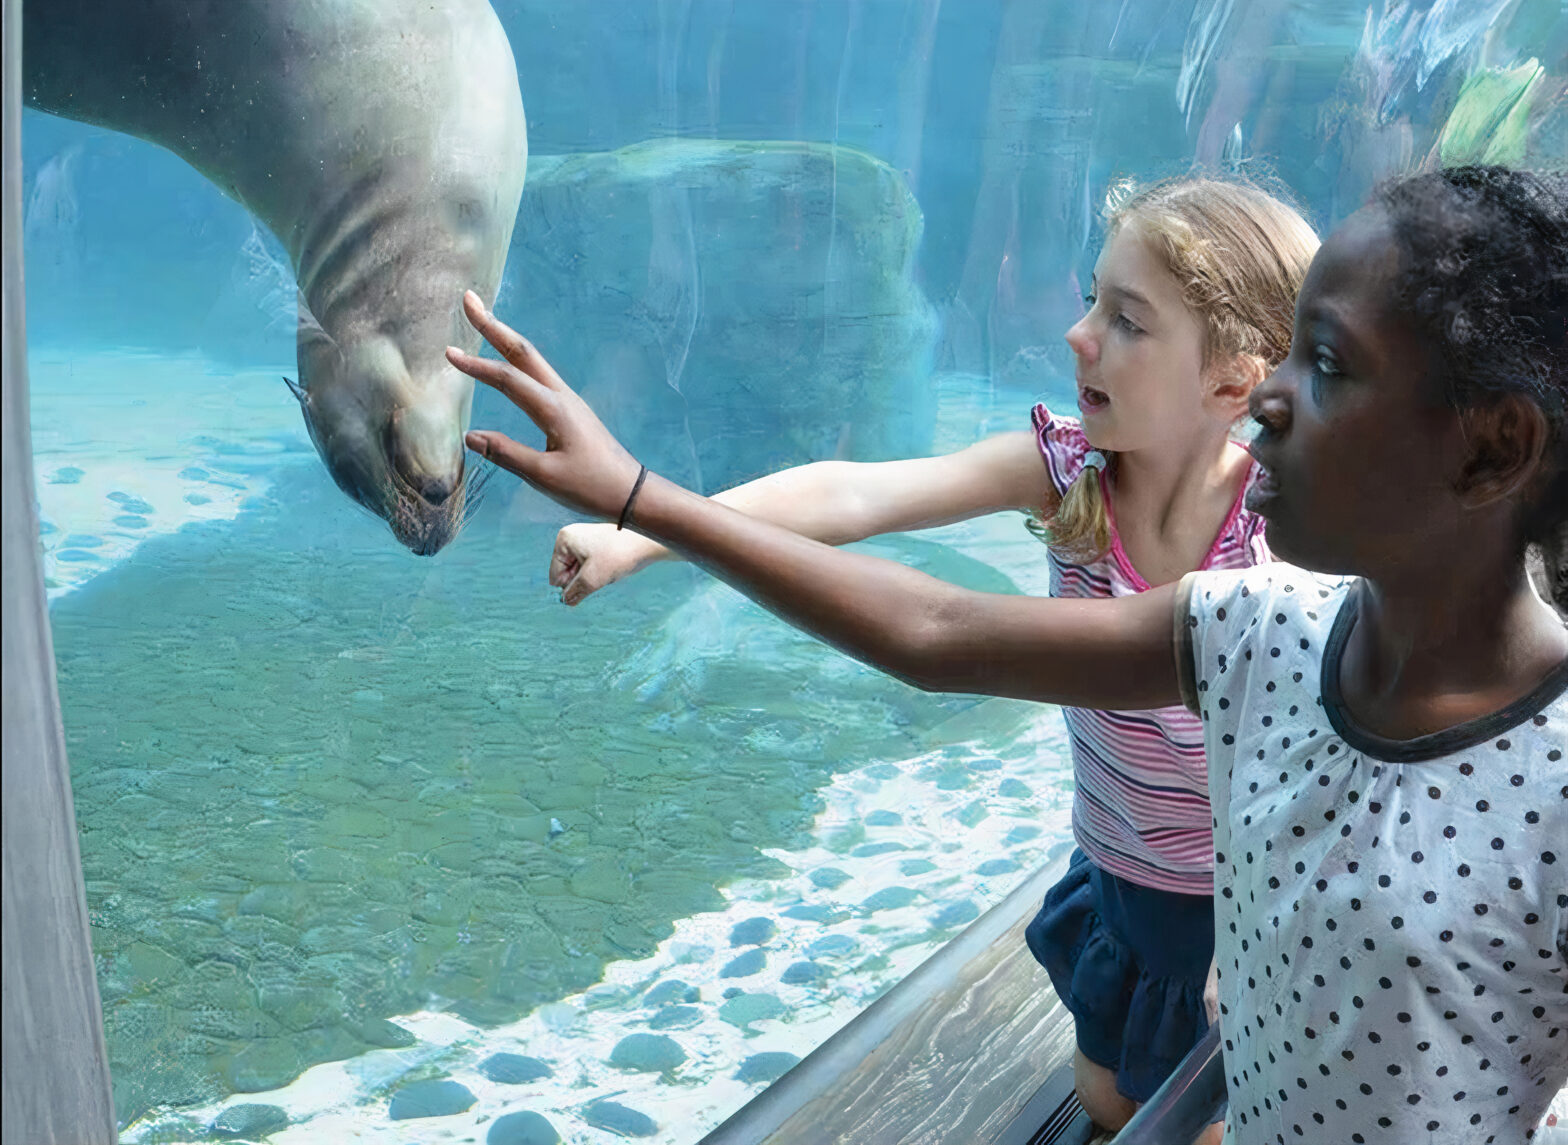 Two children reach out to touch the glass of an aquarium, behind which a seal is playing.